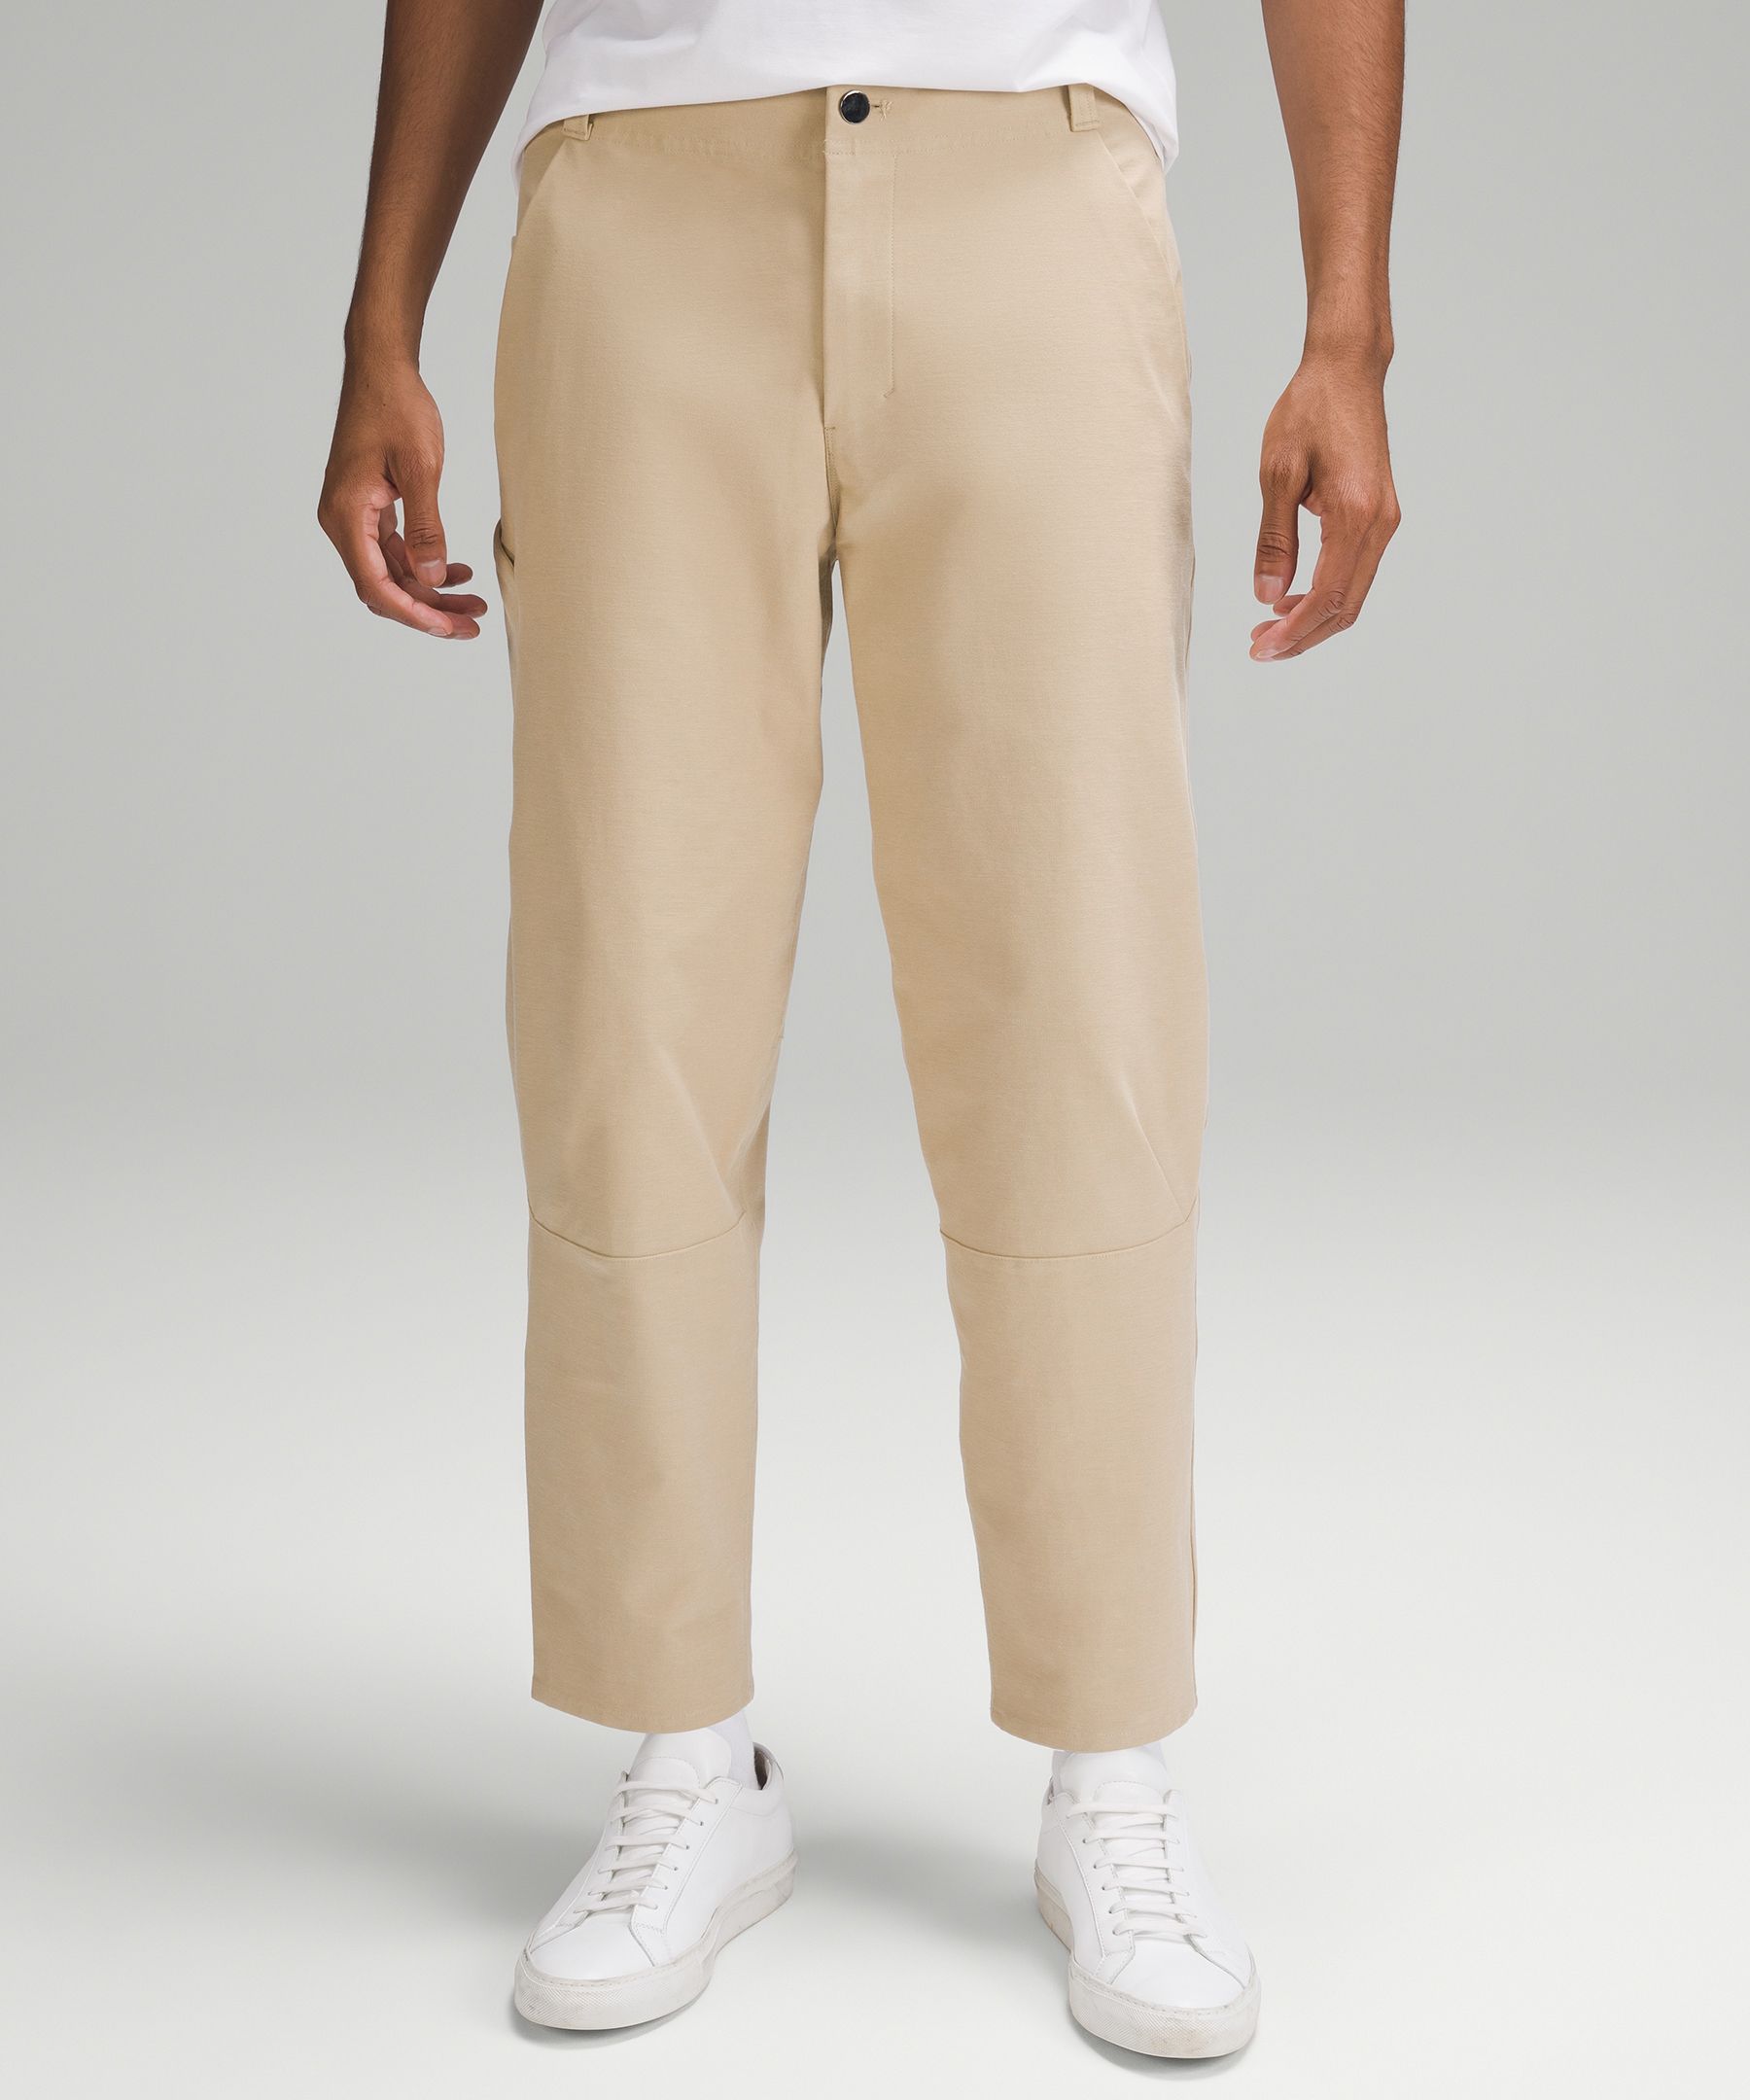 Lululemon athletica Utilitech Pull-On Relaxed-Fit Pant, Men's Joggers